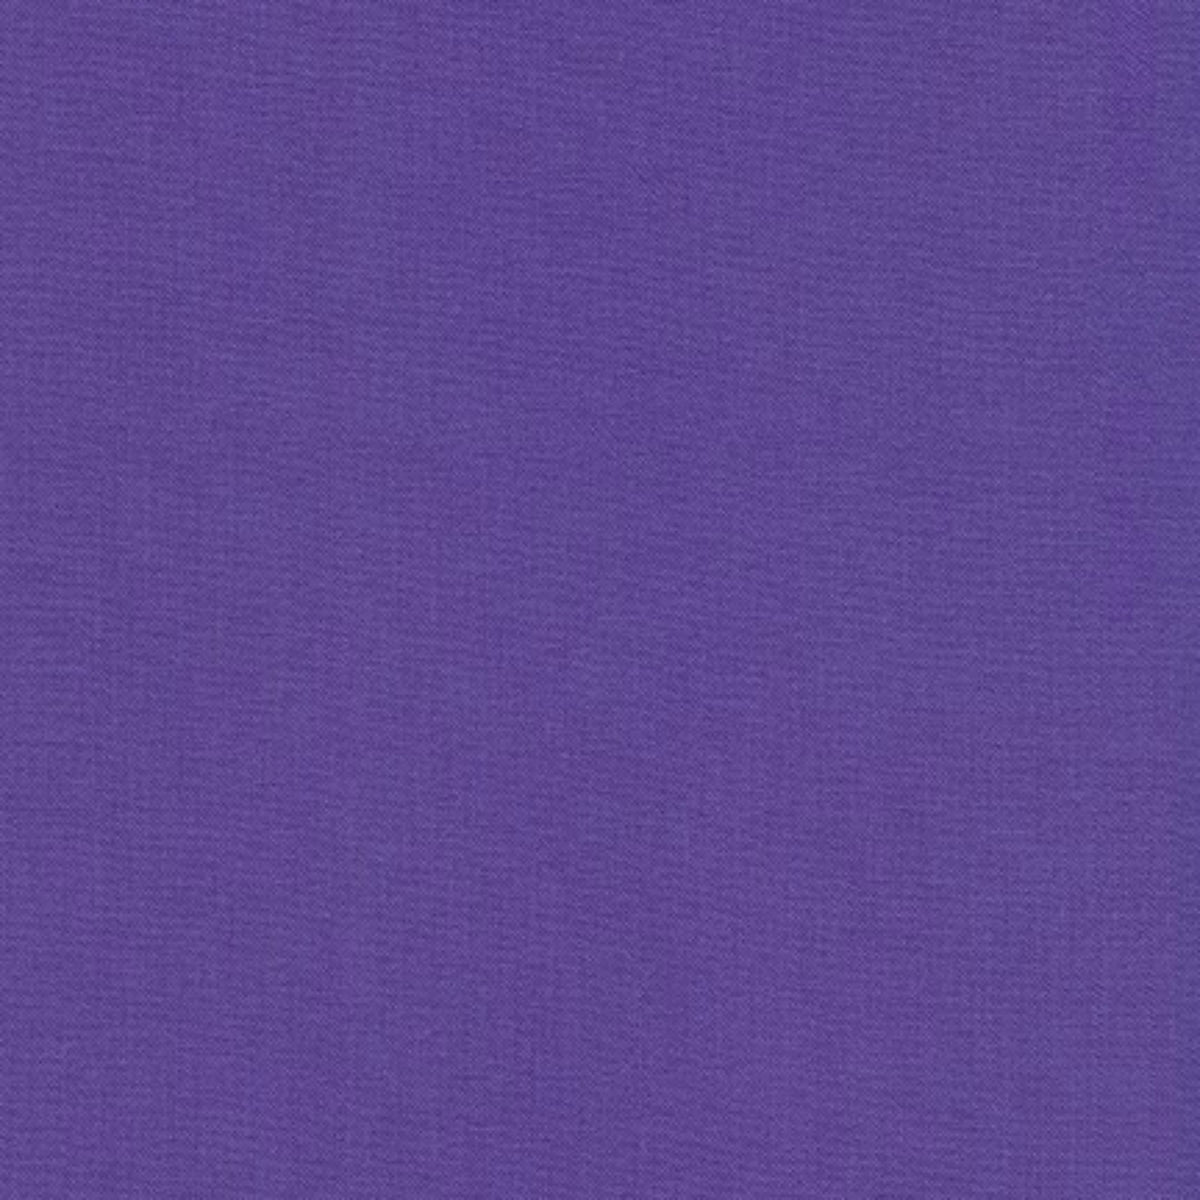 products/Bright_20Periwinkle.jpg